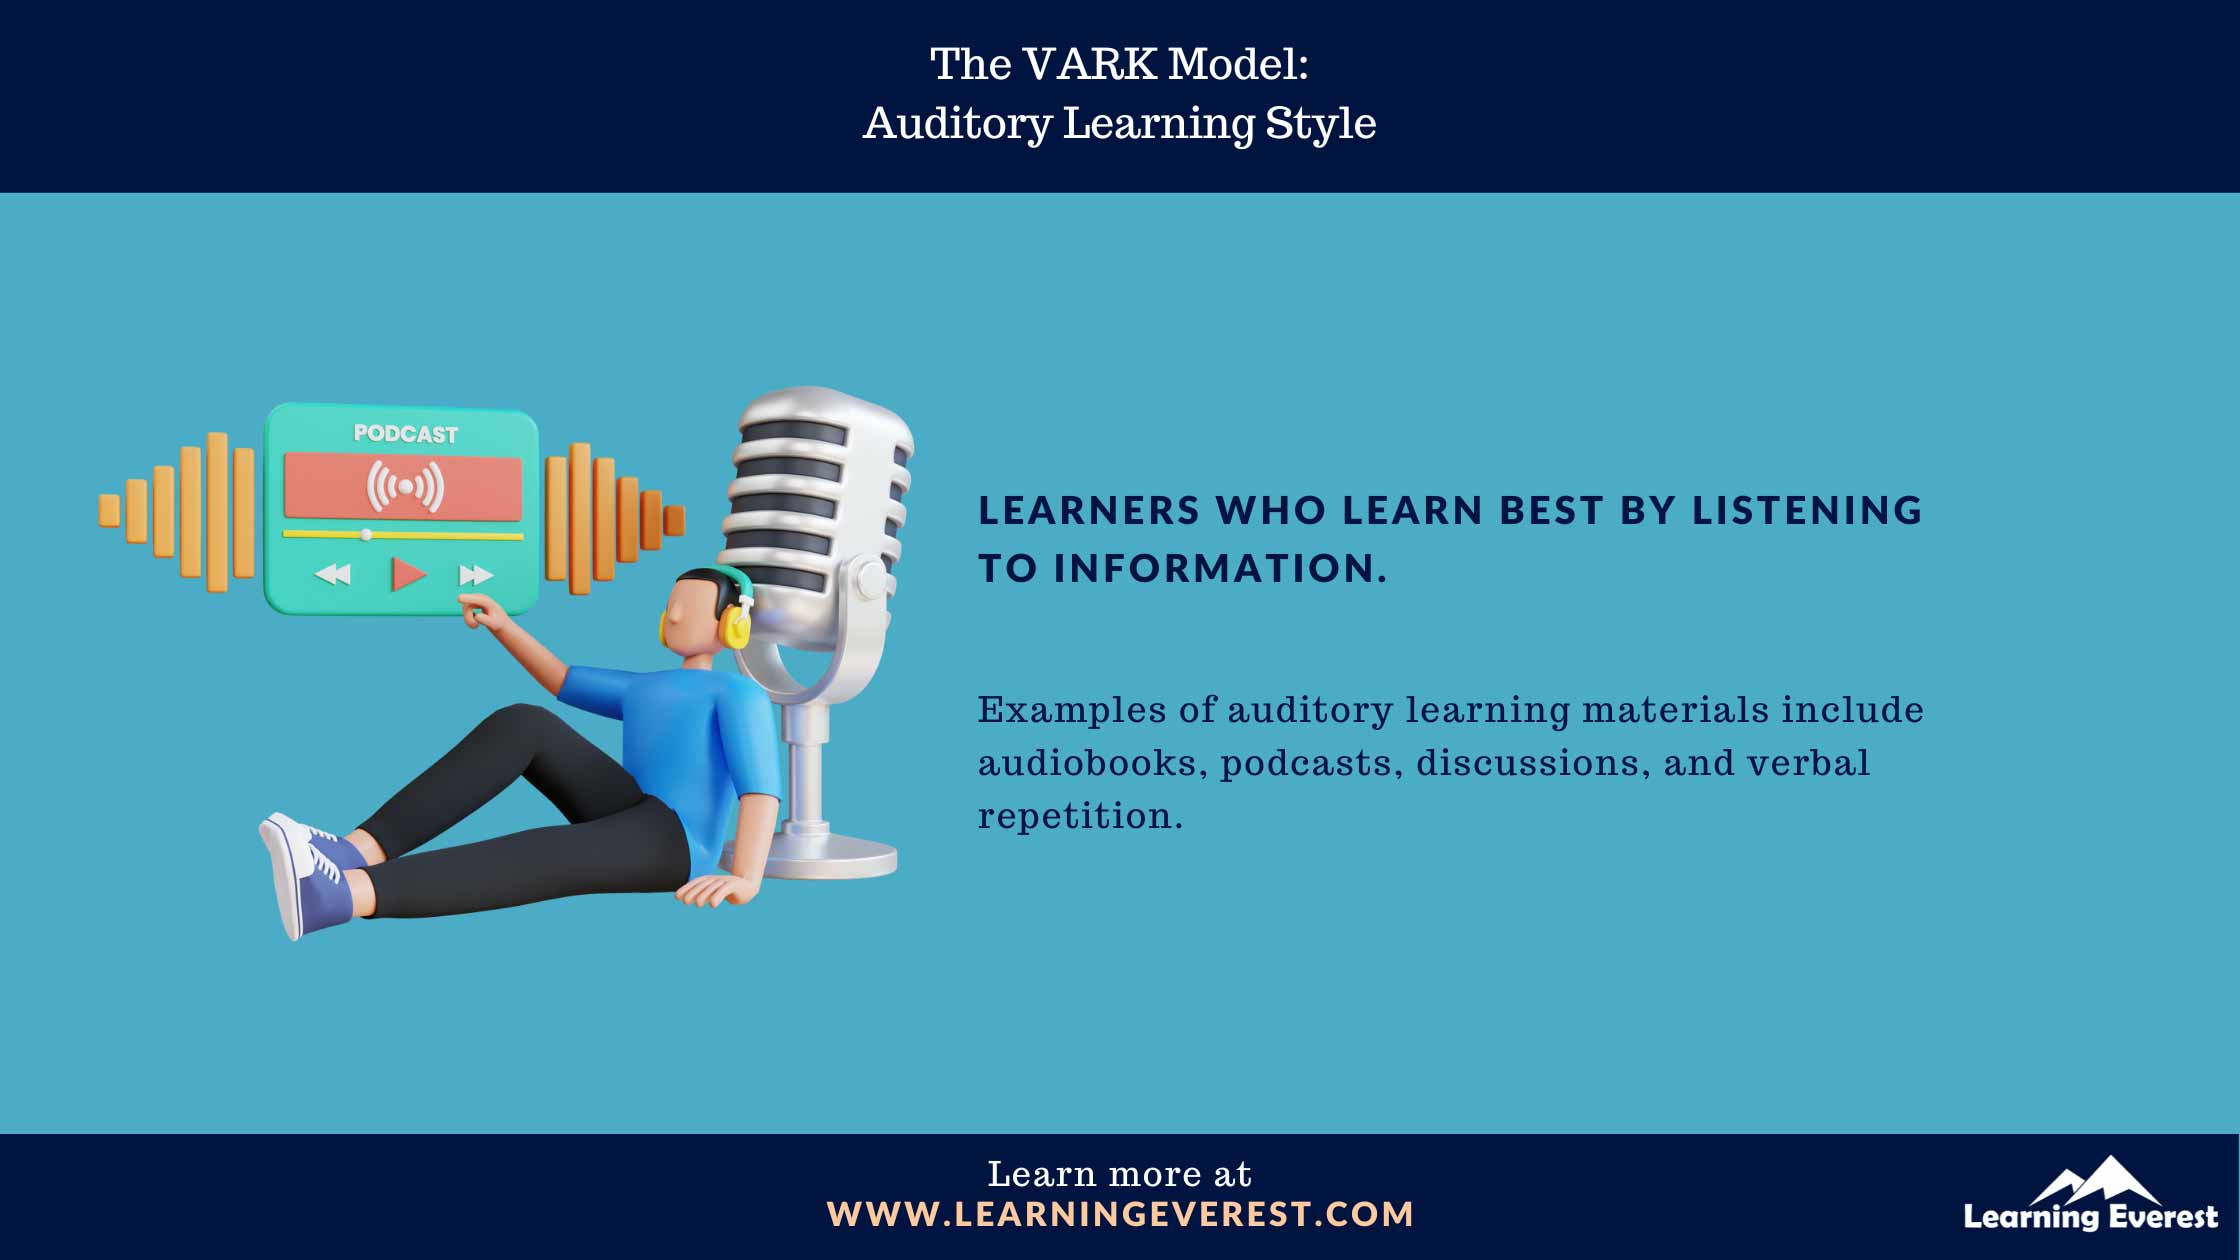 The VARK Model - Auditory Learning Style